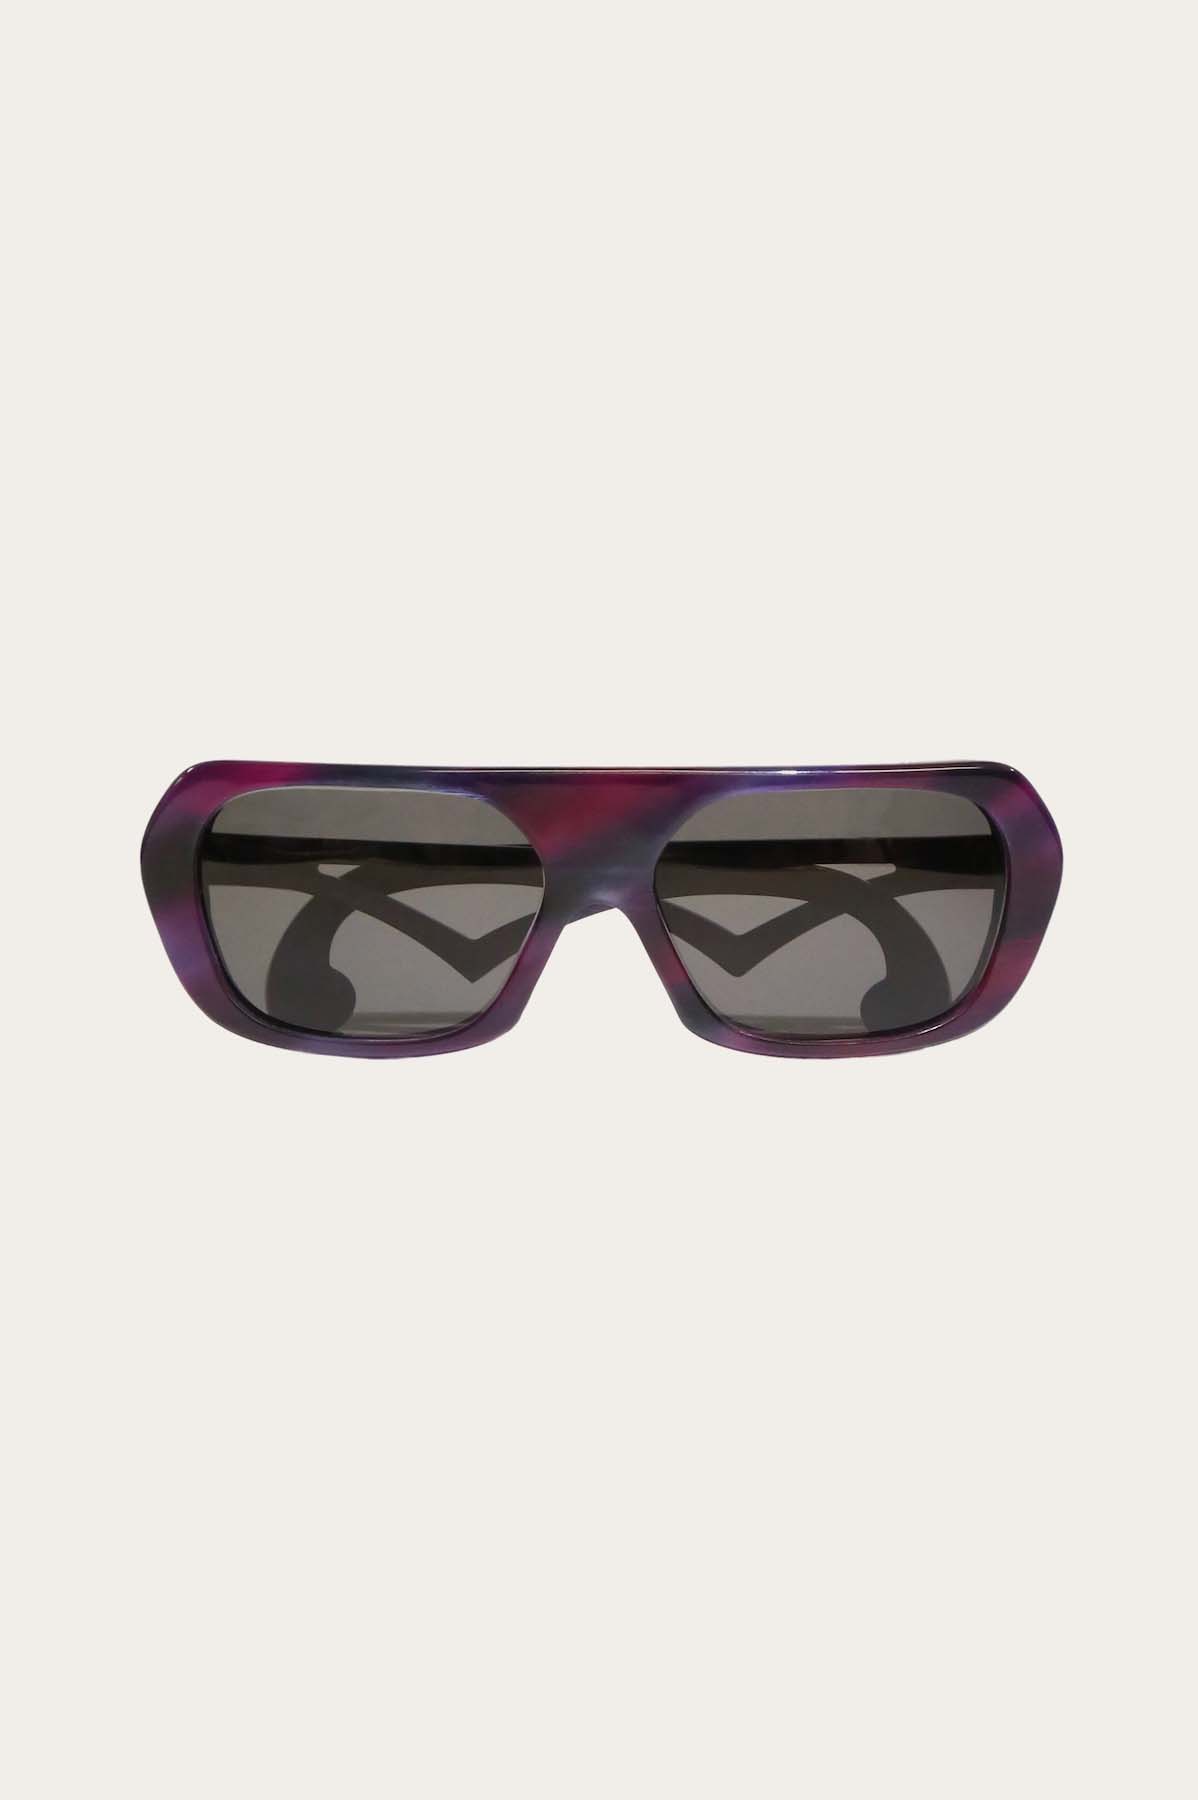 THE ANNA Purple Ombre, large eyeglass frame with tinted lenses, branch with a V-Shaped design